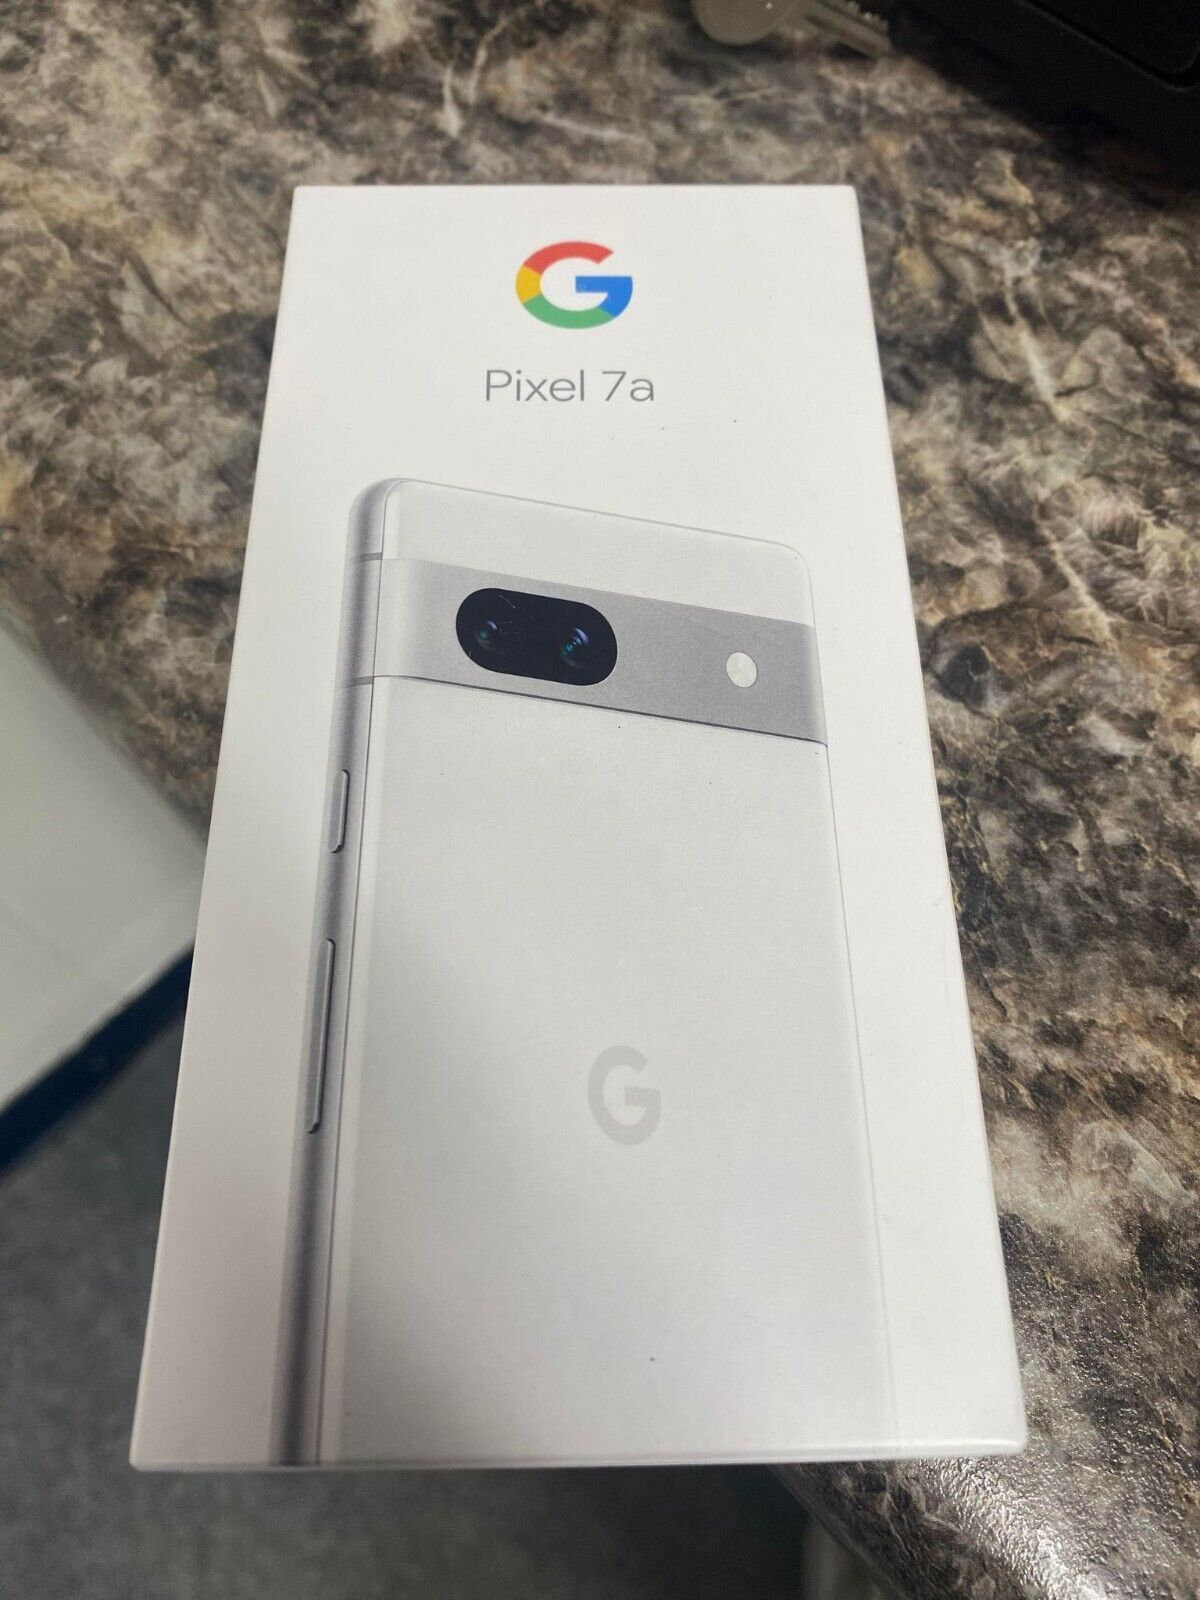 Pixel 7a retail packaging reveals some of the phone's finer details